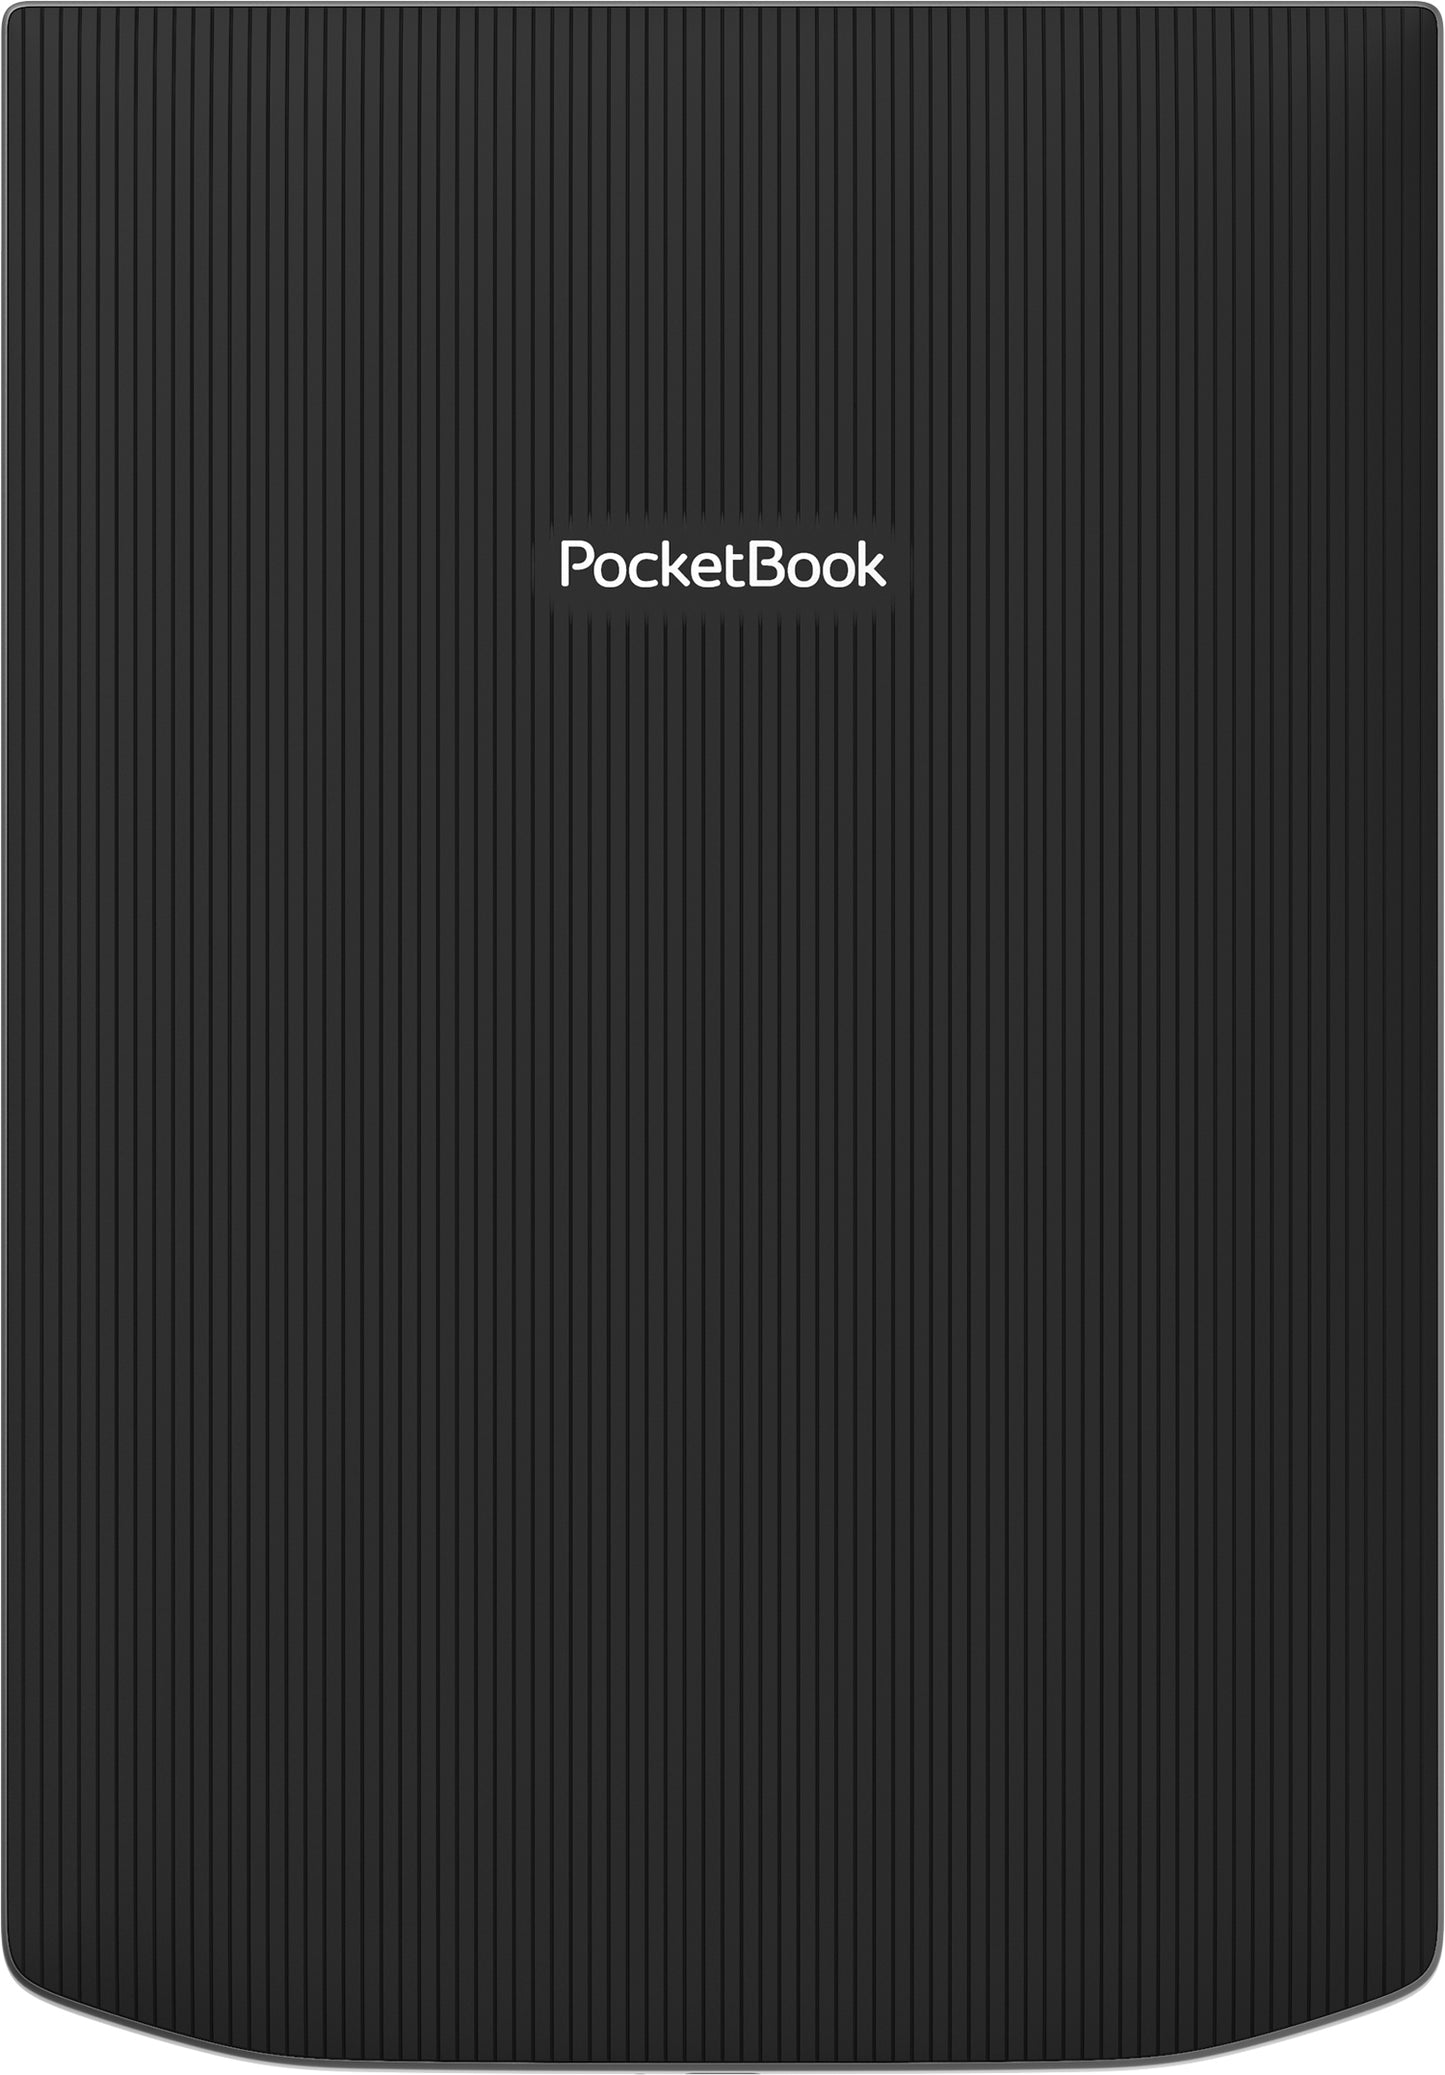 PocketBook InkPad X Pro: excellent note-taker